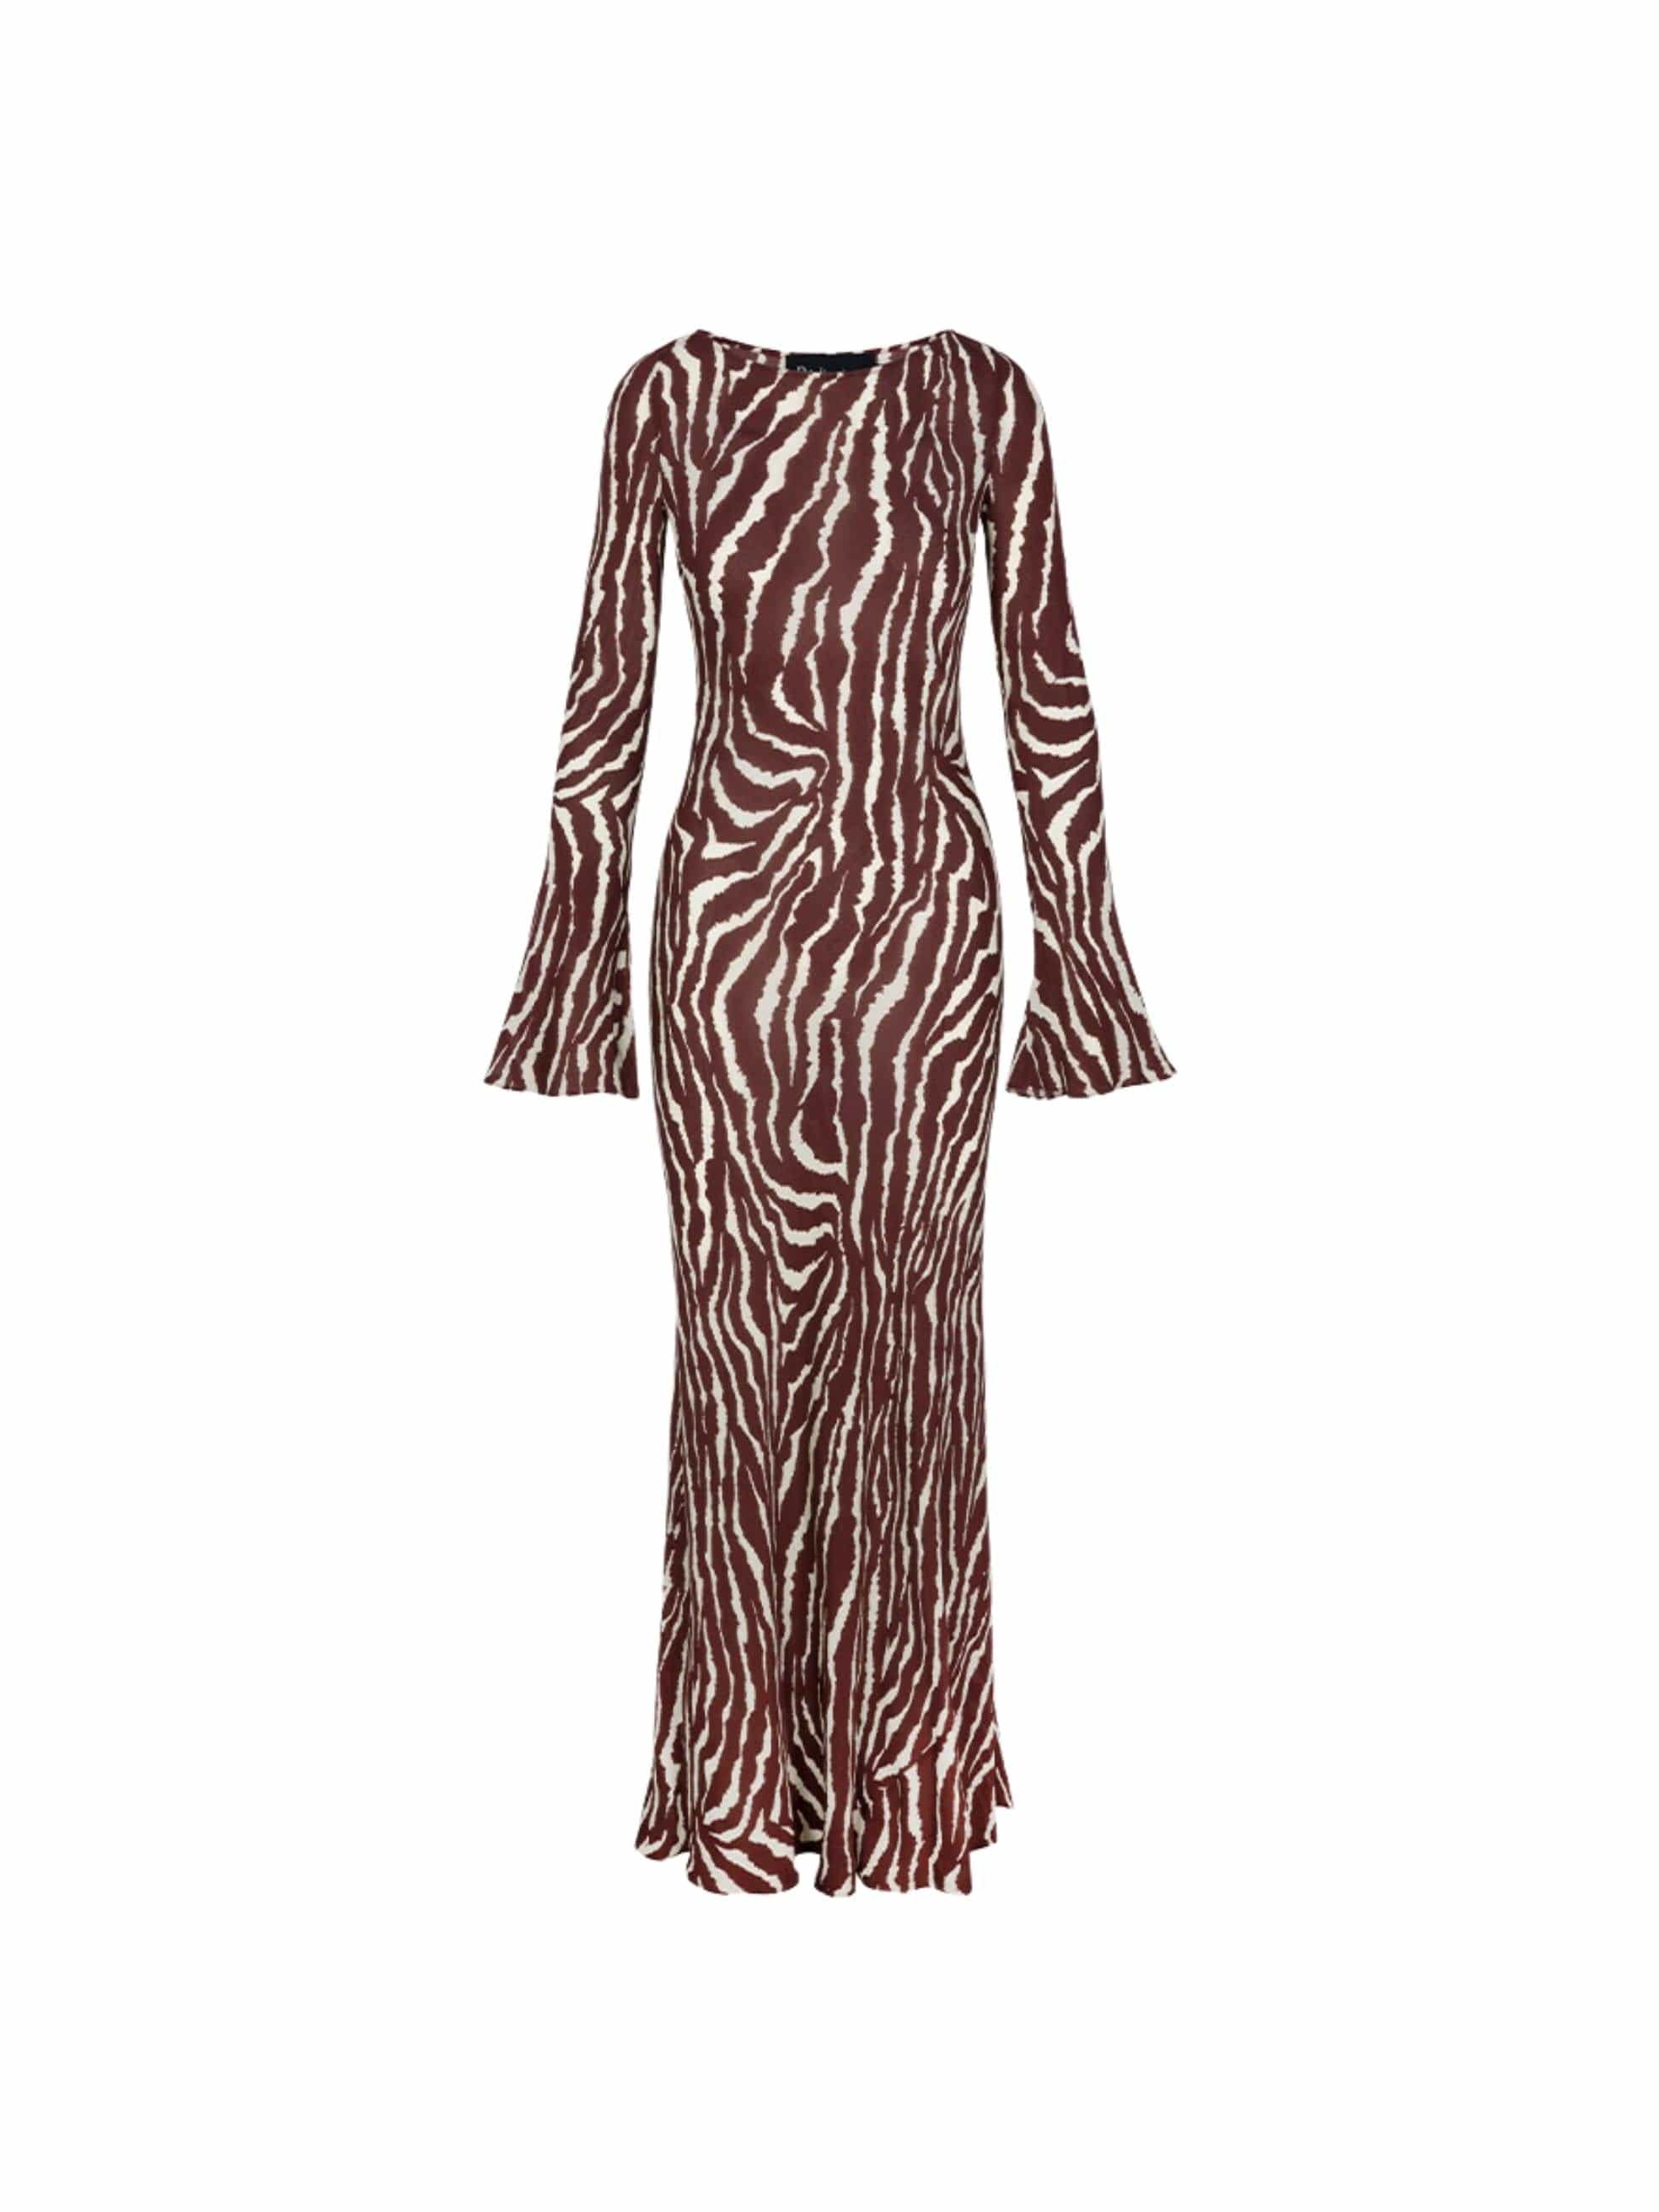 The Gia Dress in Animal